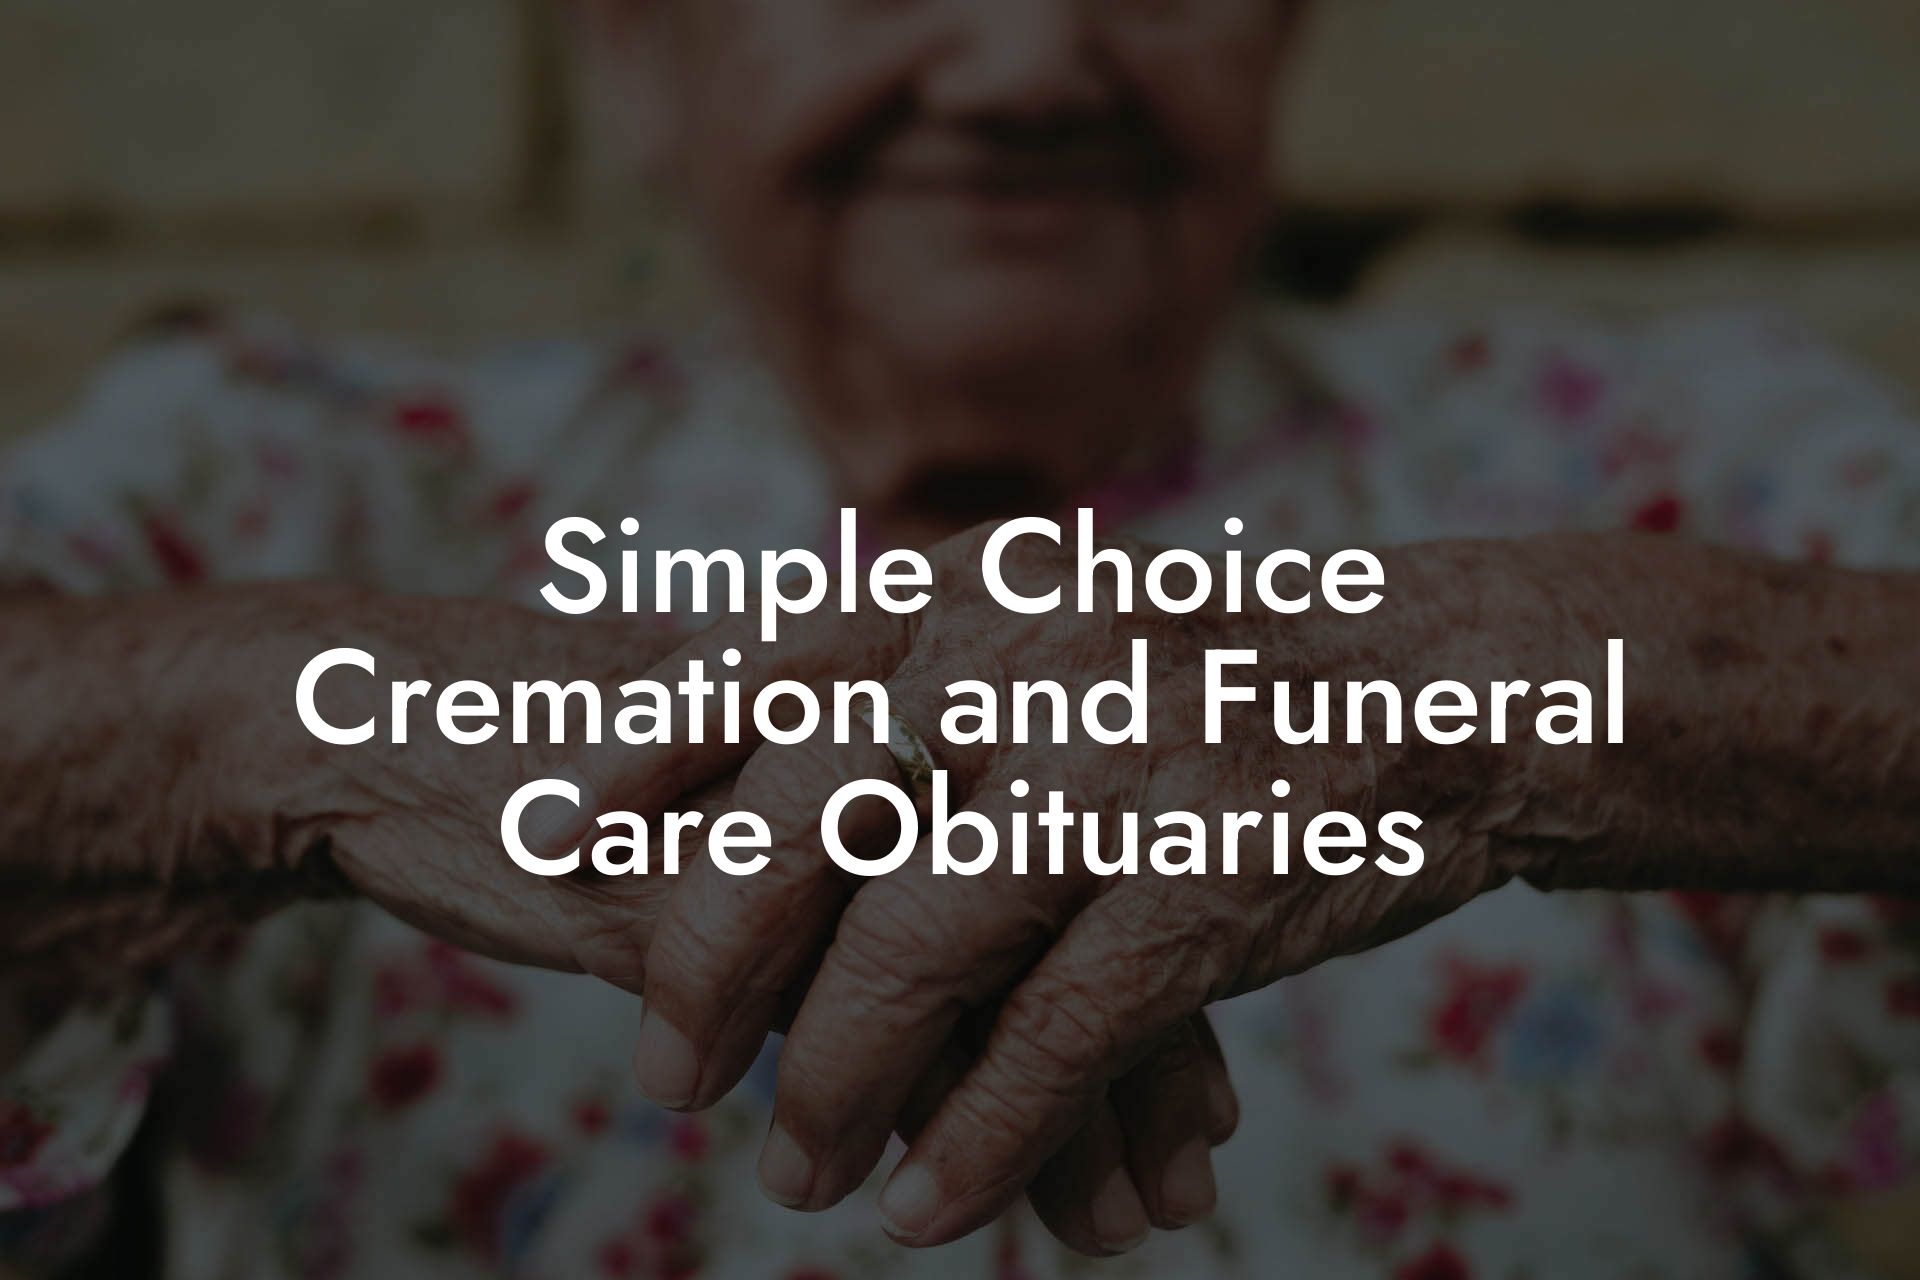 Simple Choice Cremation and Funeral Care Obituaries